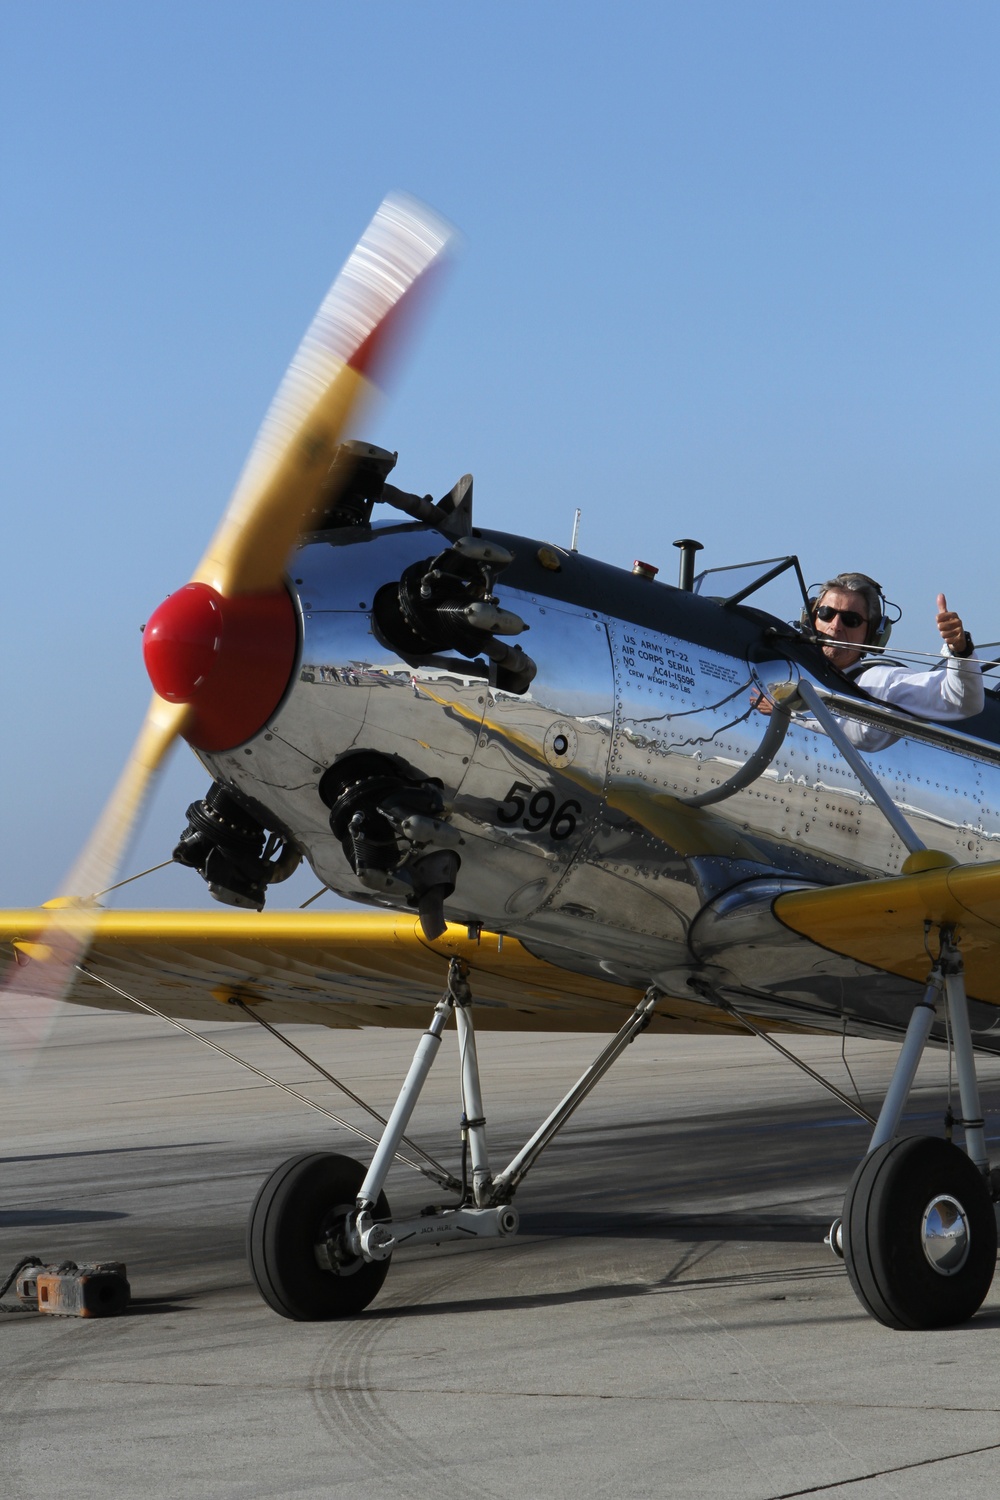 Air Show preparation ‘takes off’ with historic aircraft